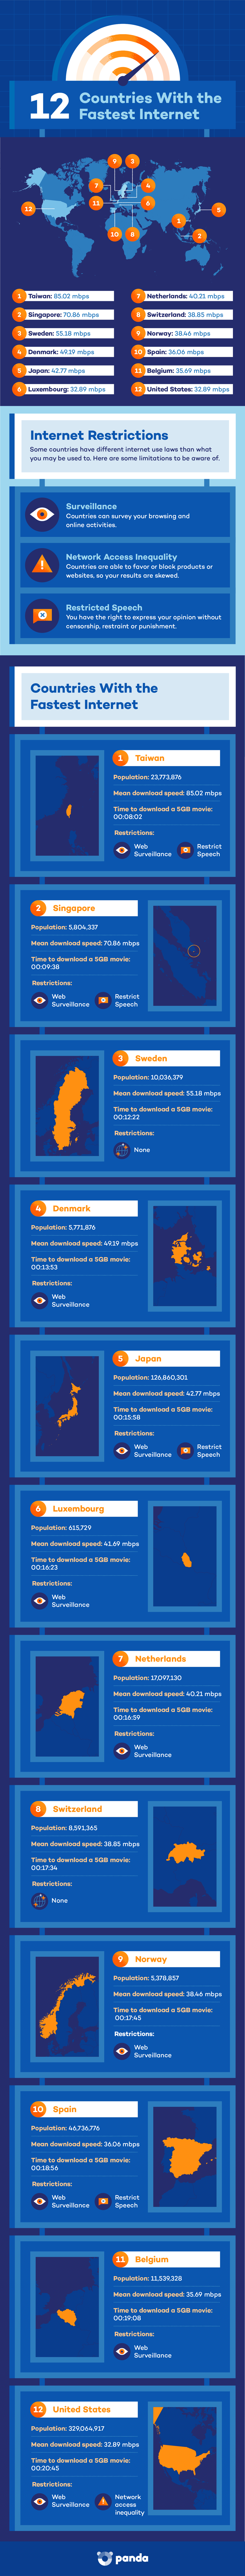 infographic of countries with the fastest internet